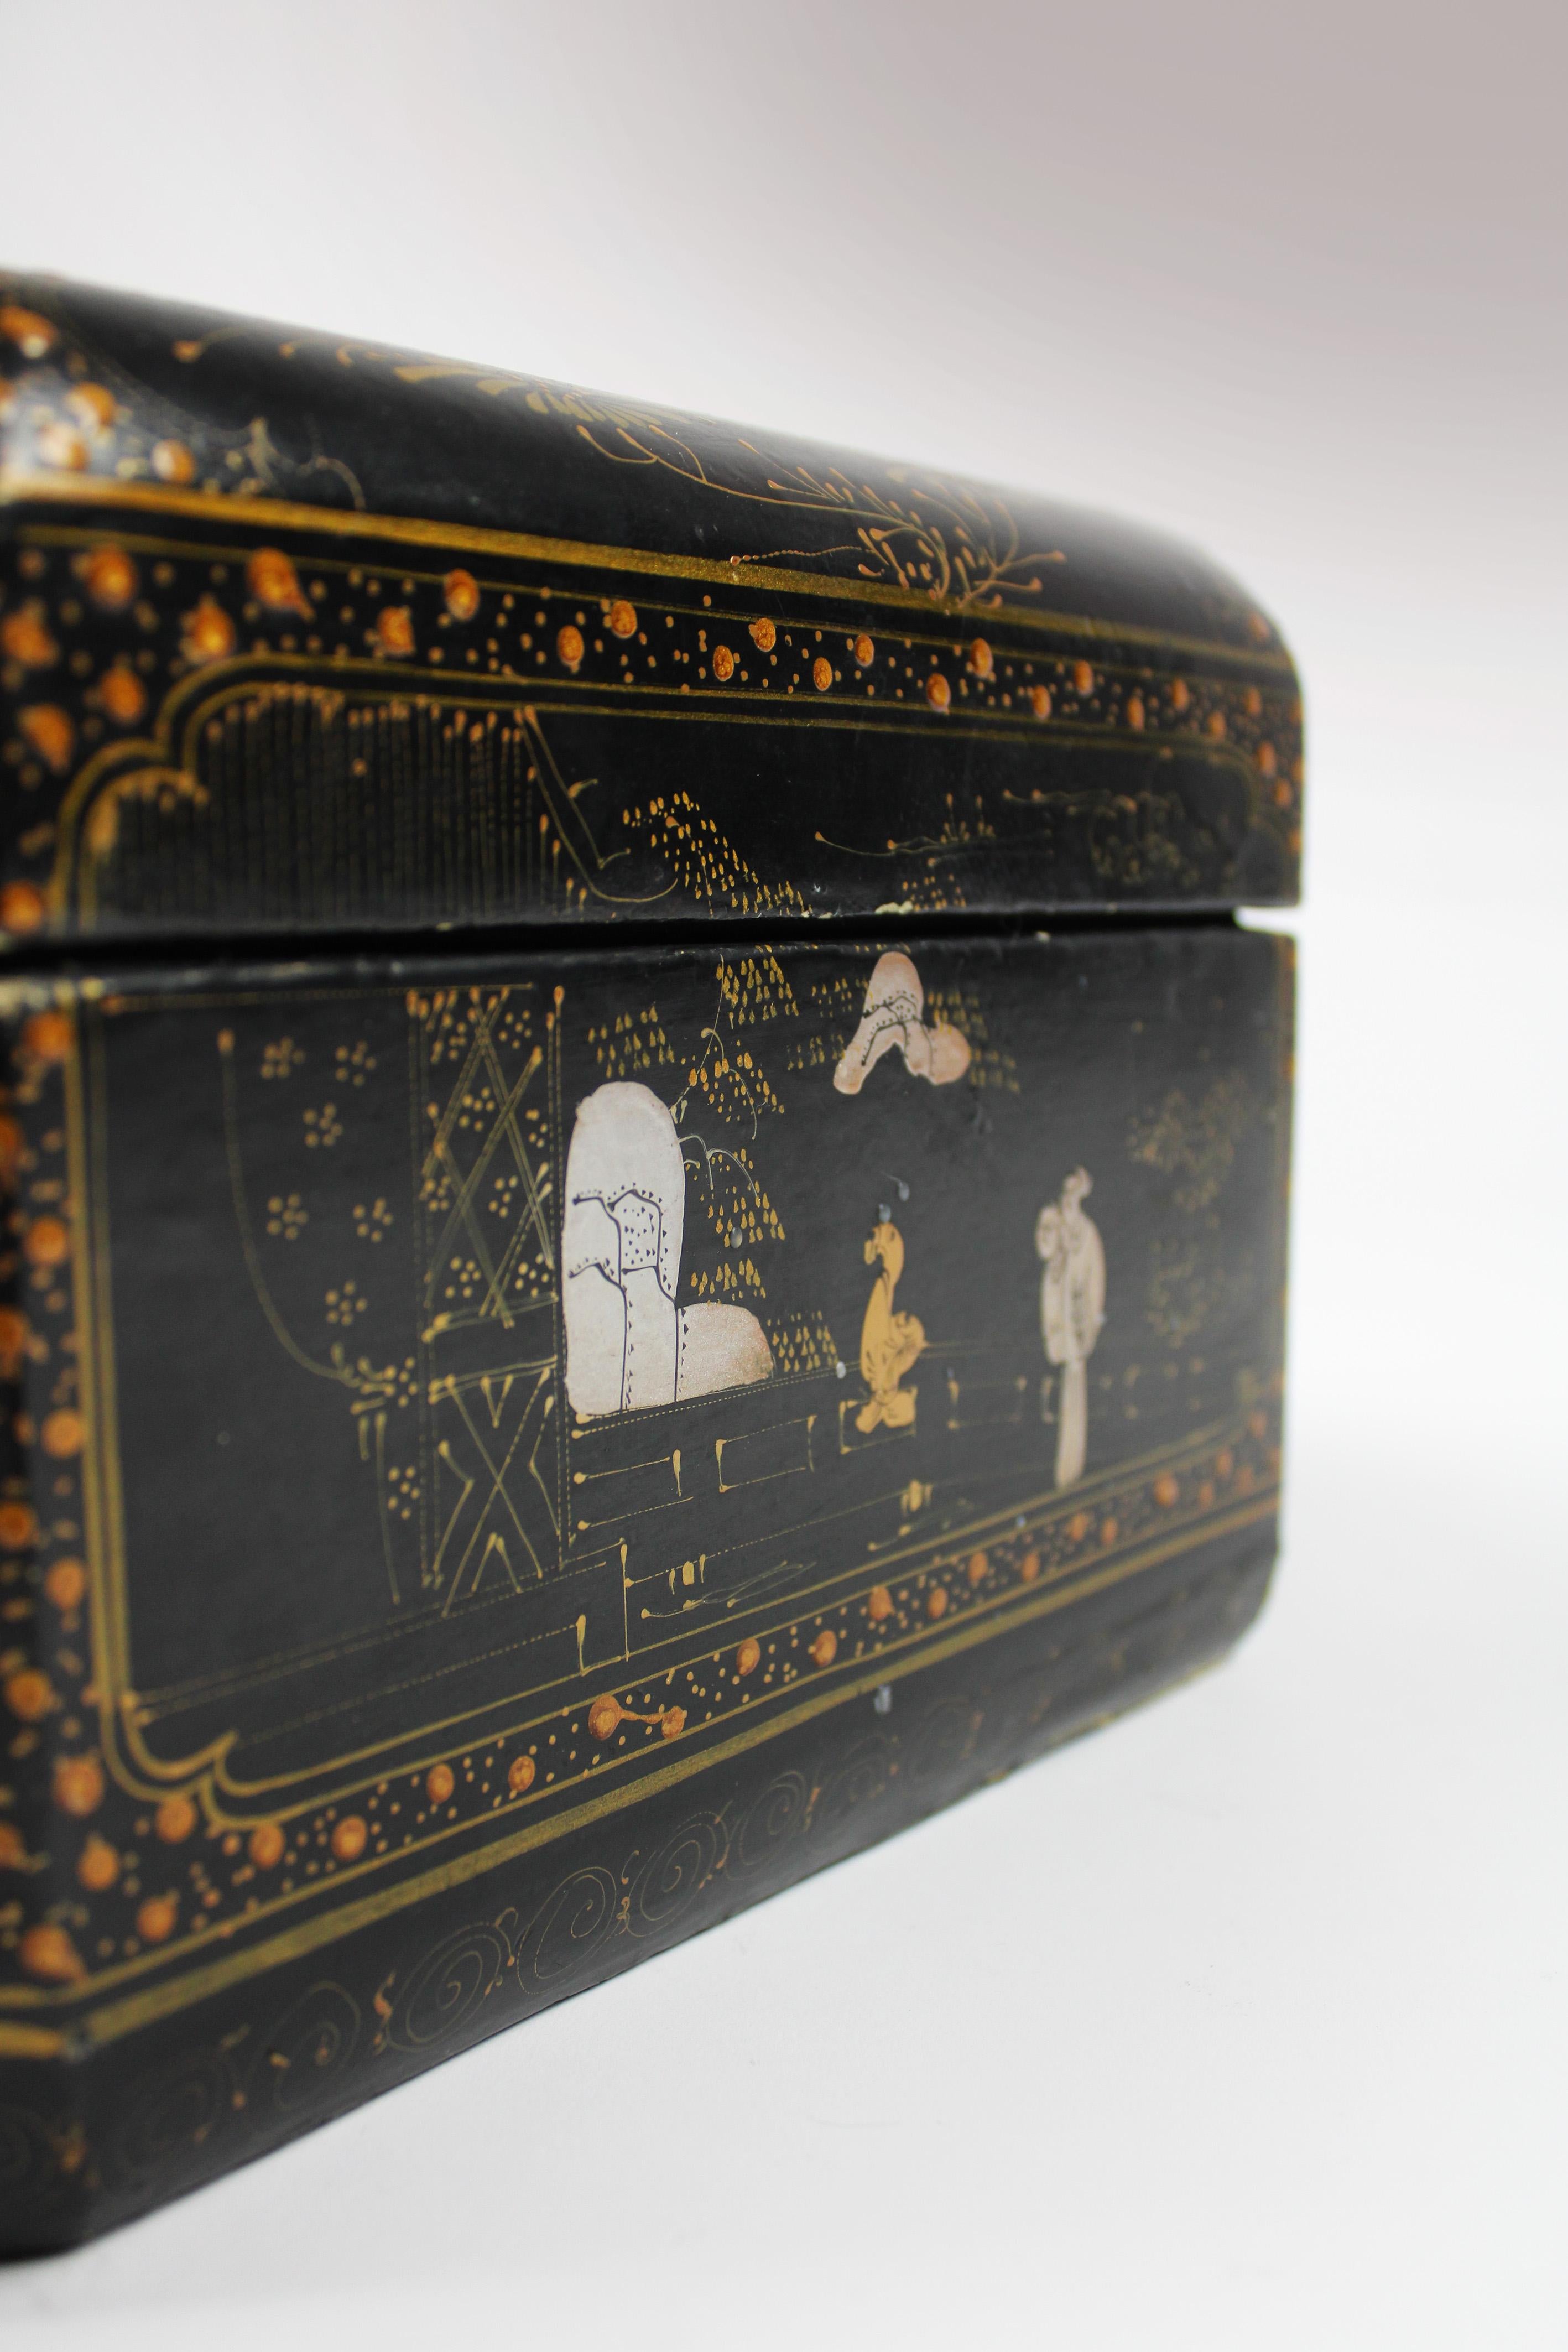 19th Century Lacquered Box Black Octogonal Chinese Export Gilded Floral For Sale 4